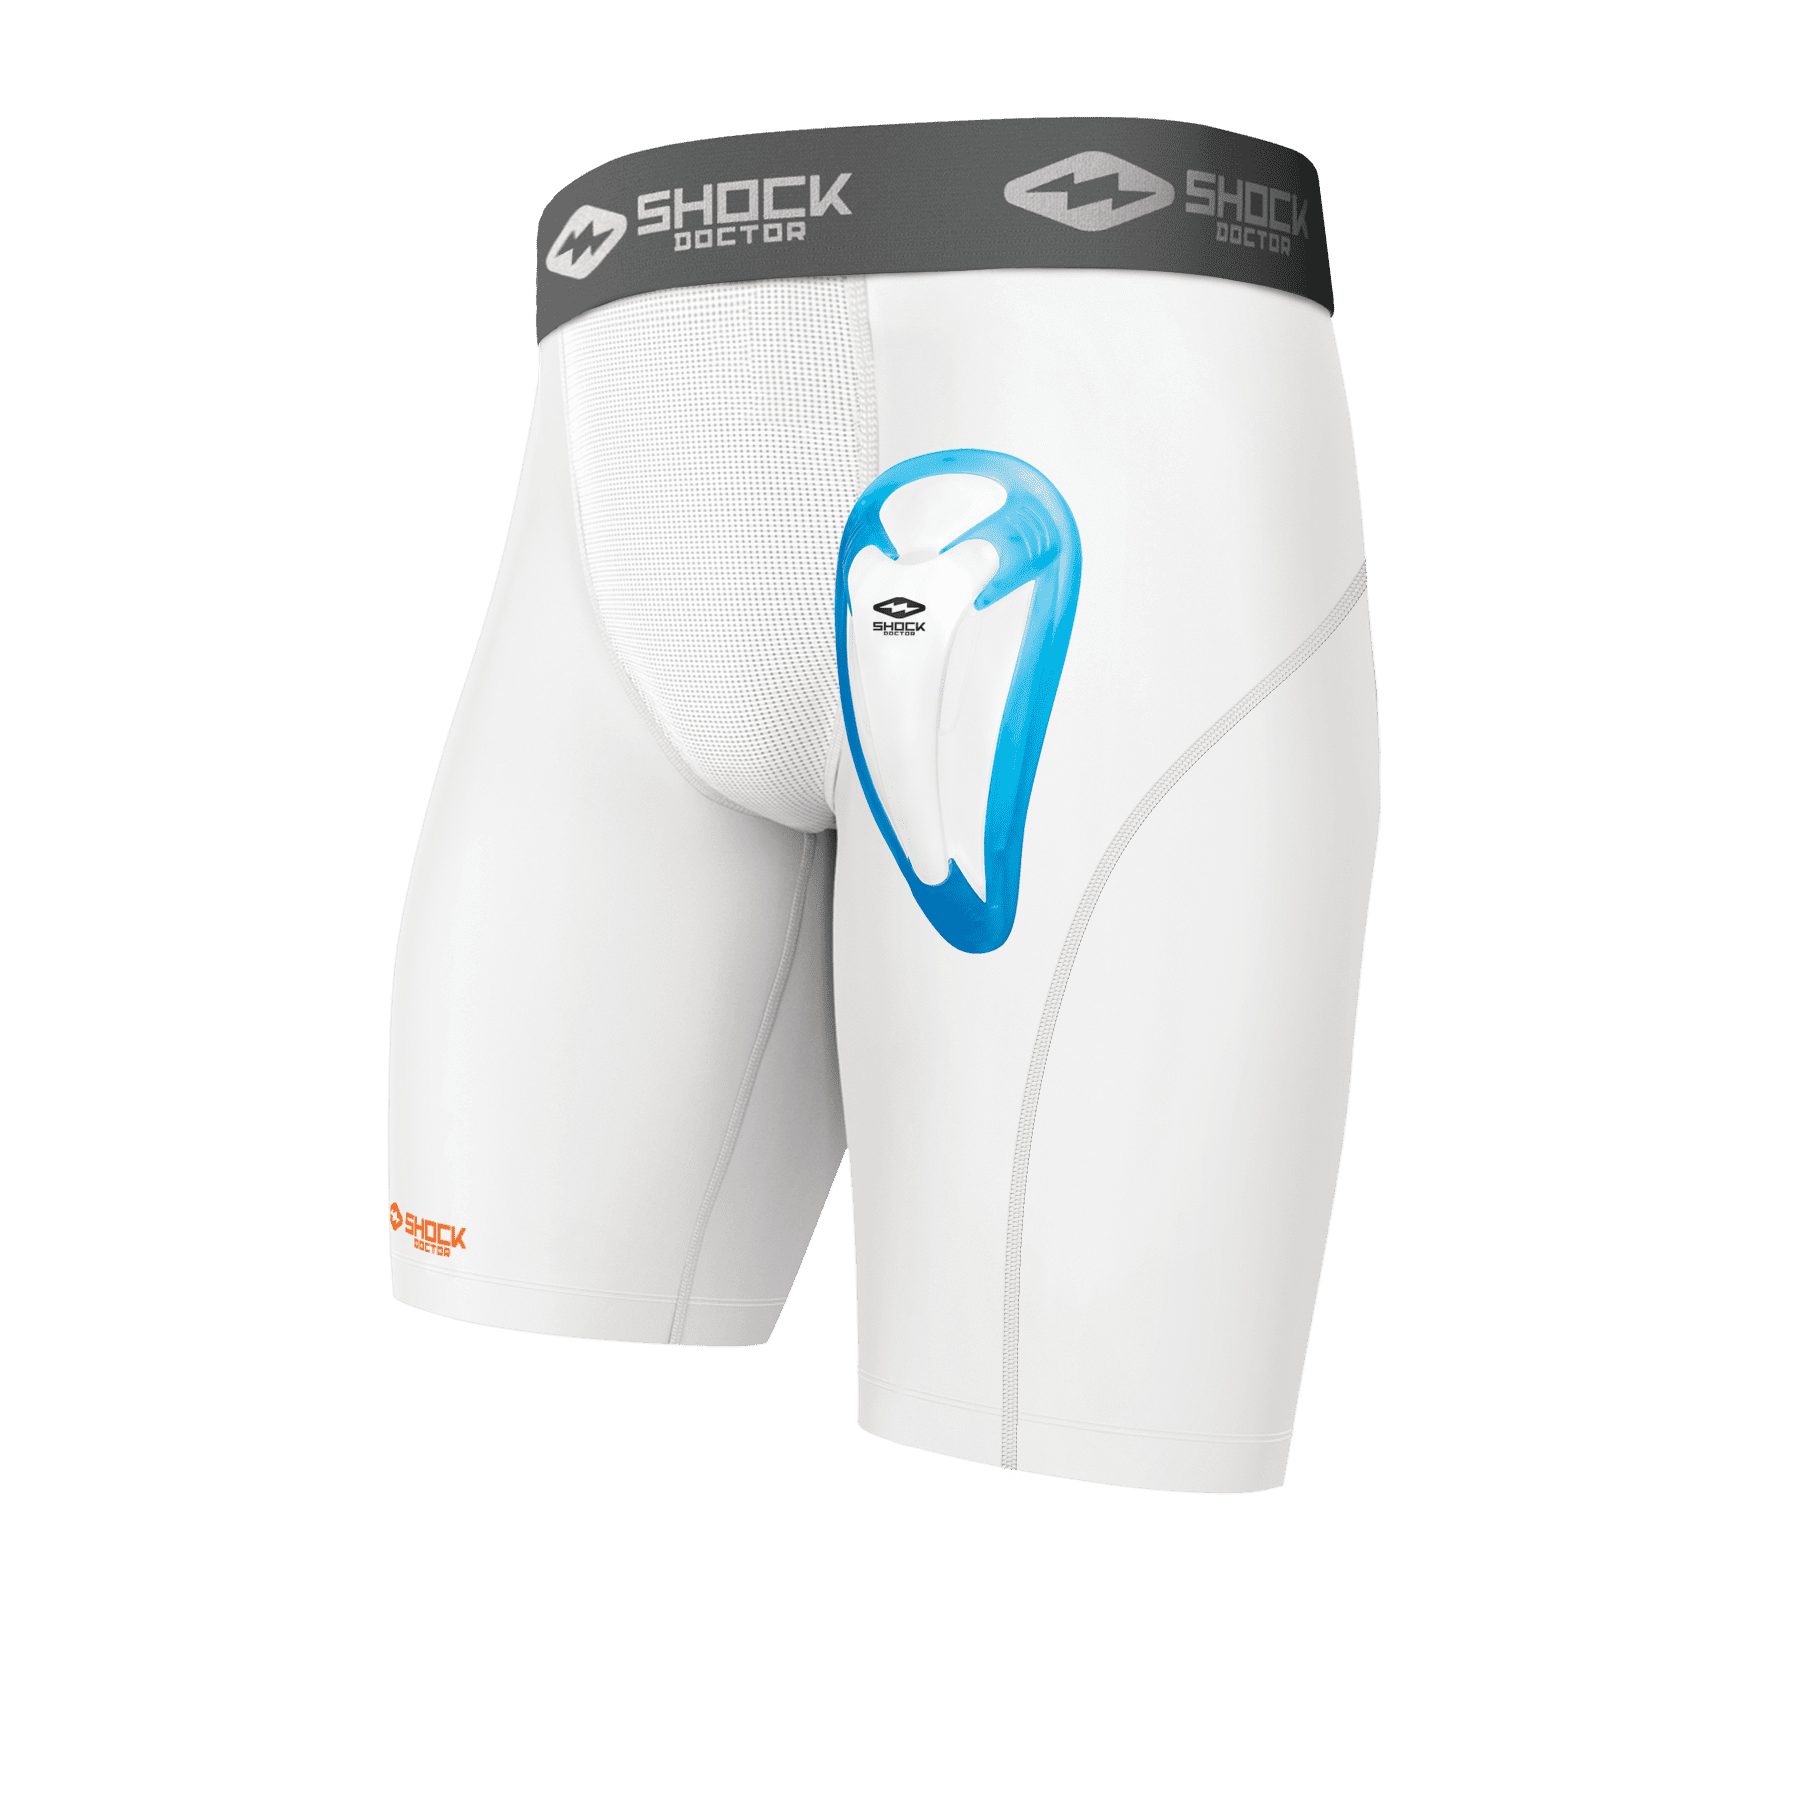 Boys,Youth & Adult Men Shock Doctor Compression Shorts with Bio-Flex Supporter Cup Included 